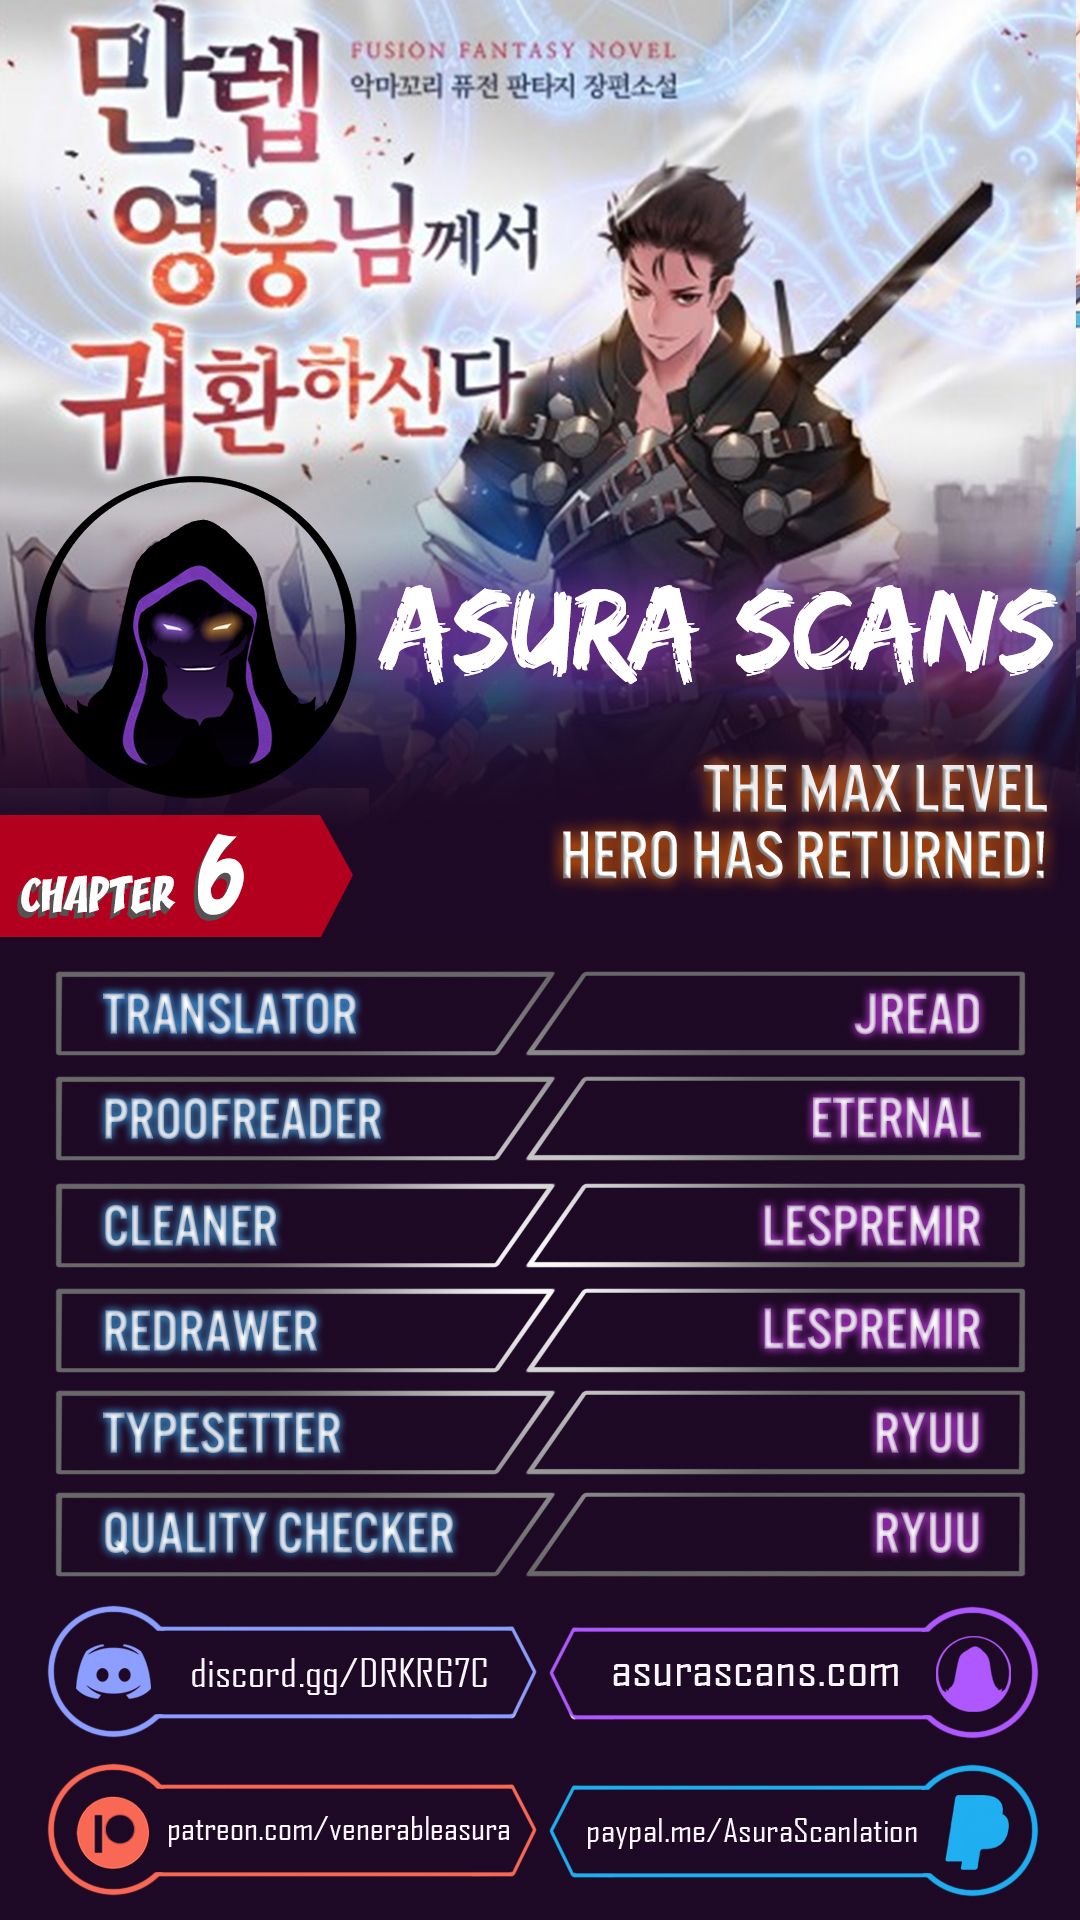 The Max Level Hero has Returned! chapter 6